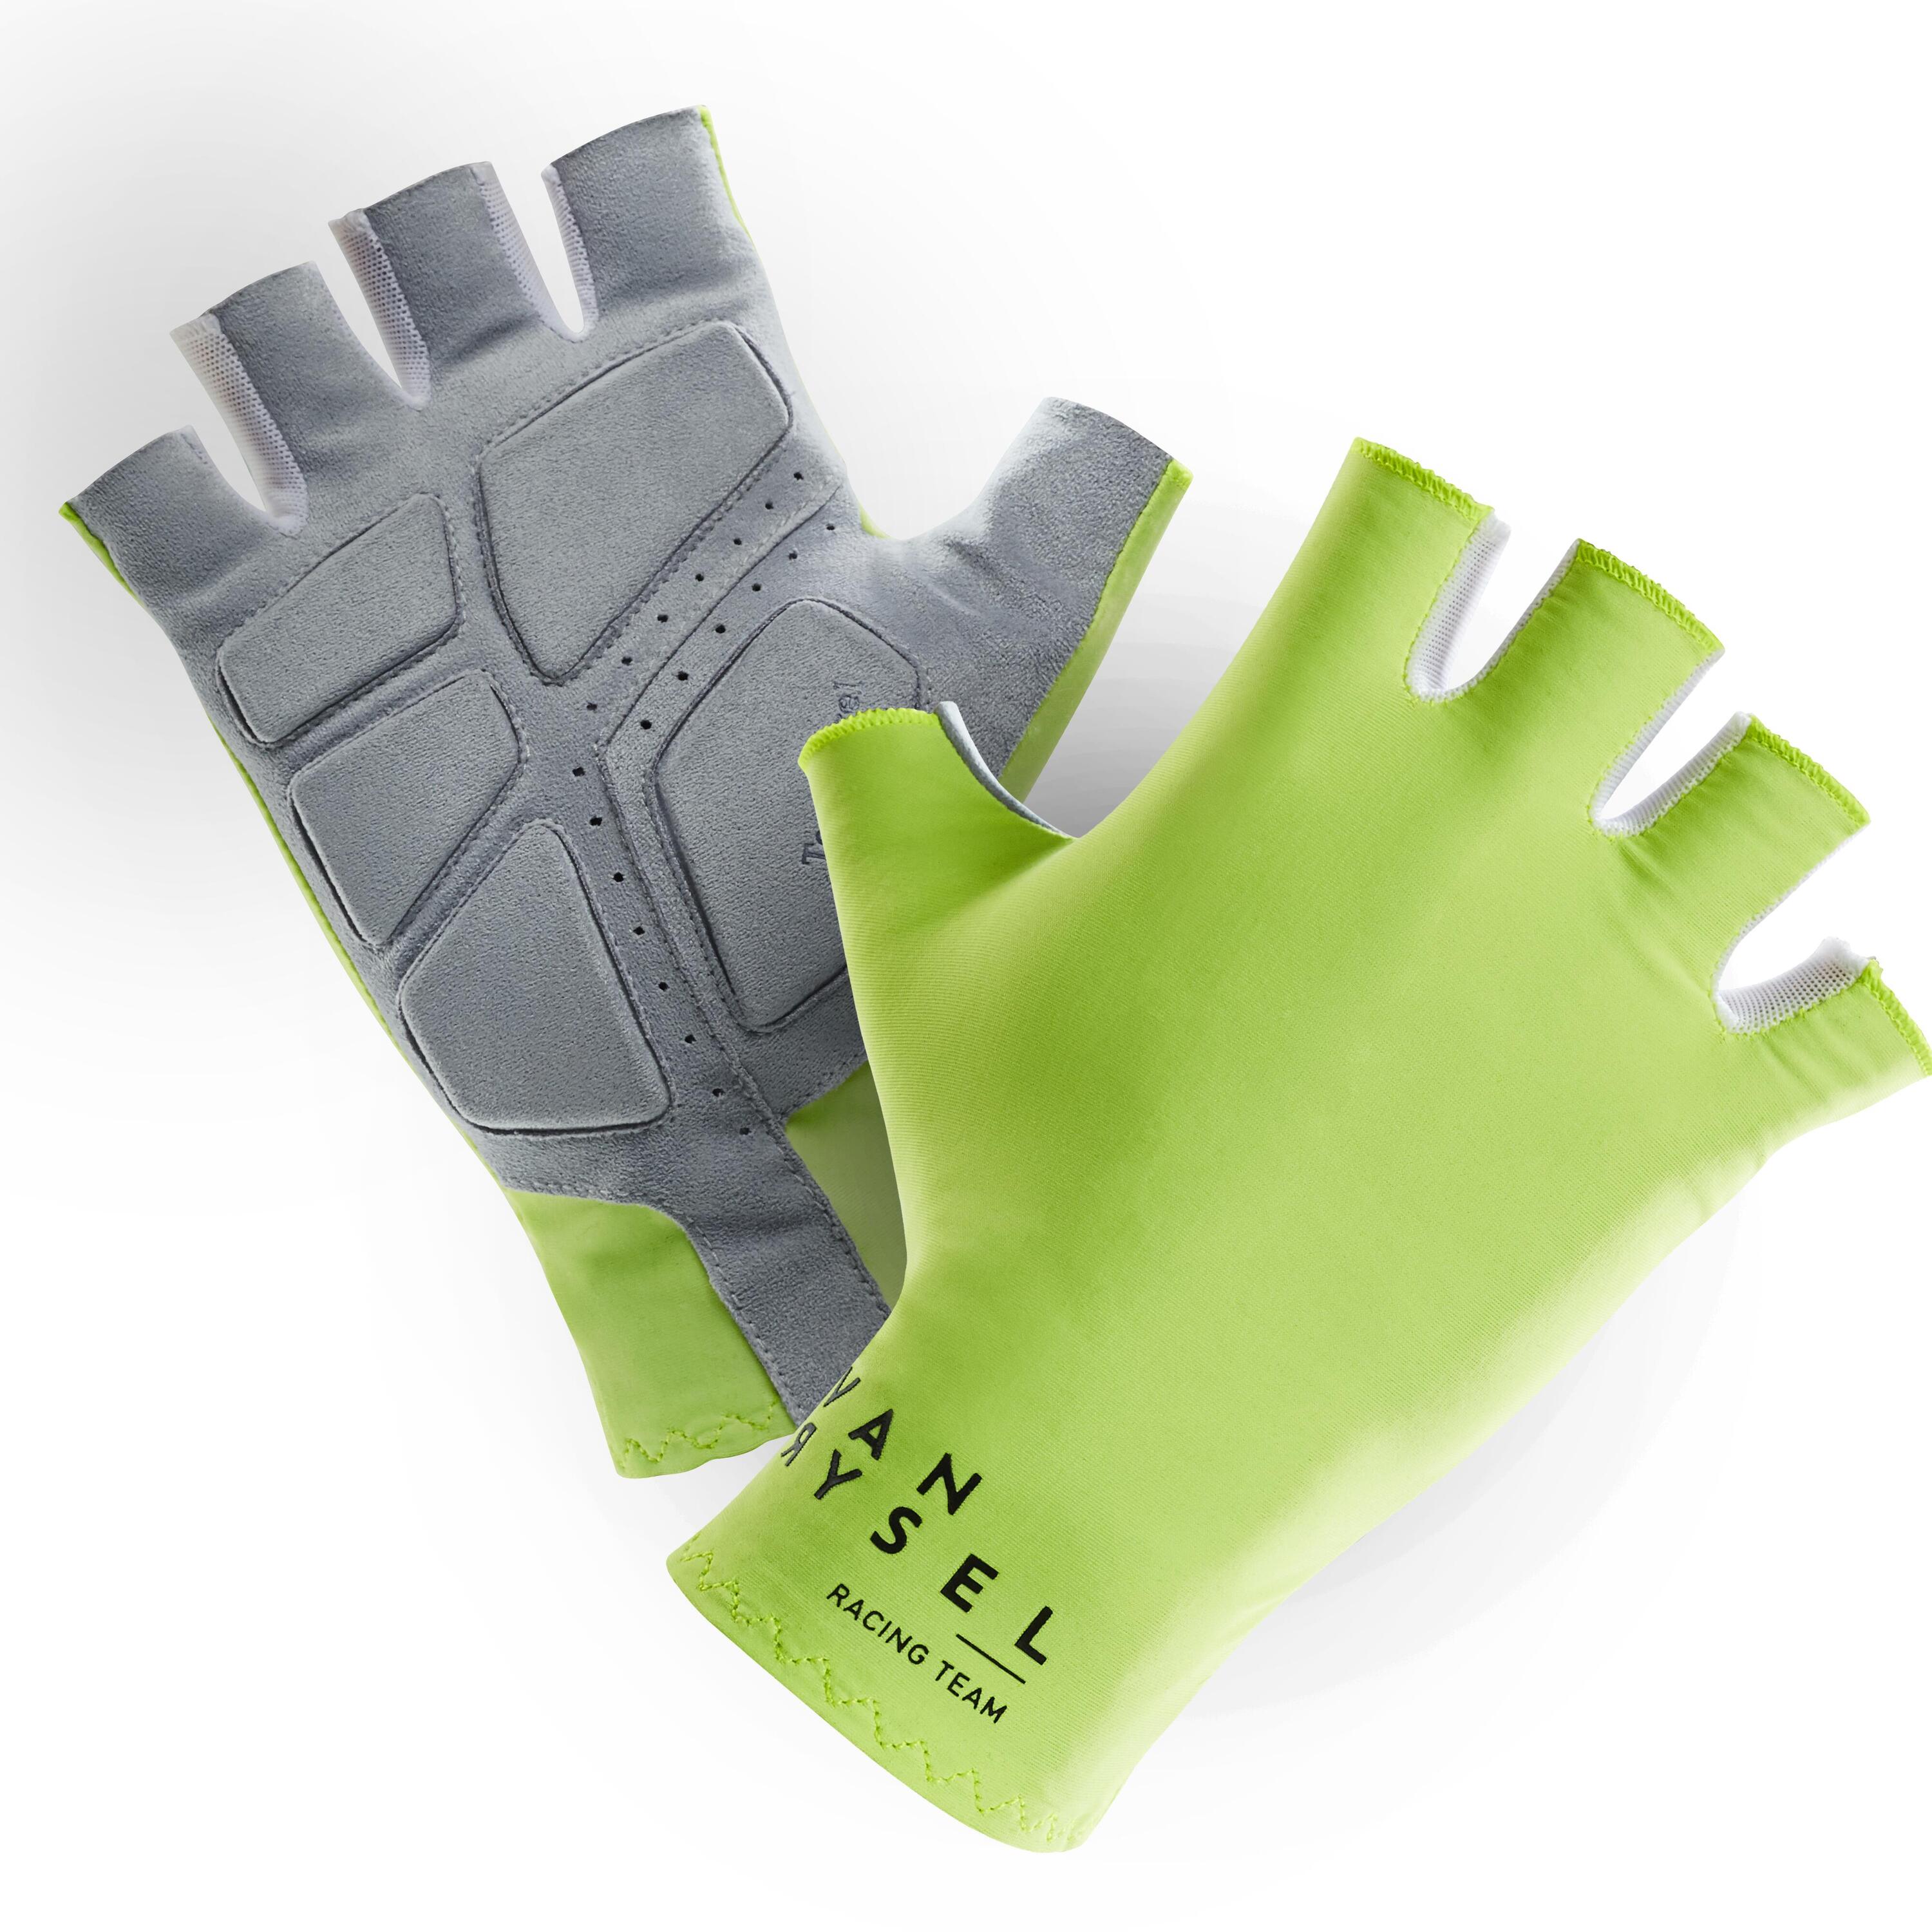 Road Cycling Gloves 900 Race - Neon Yellow 3/4